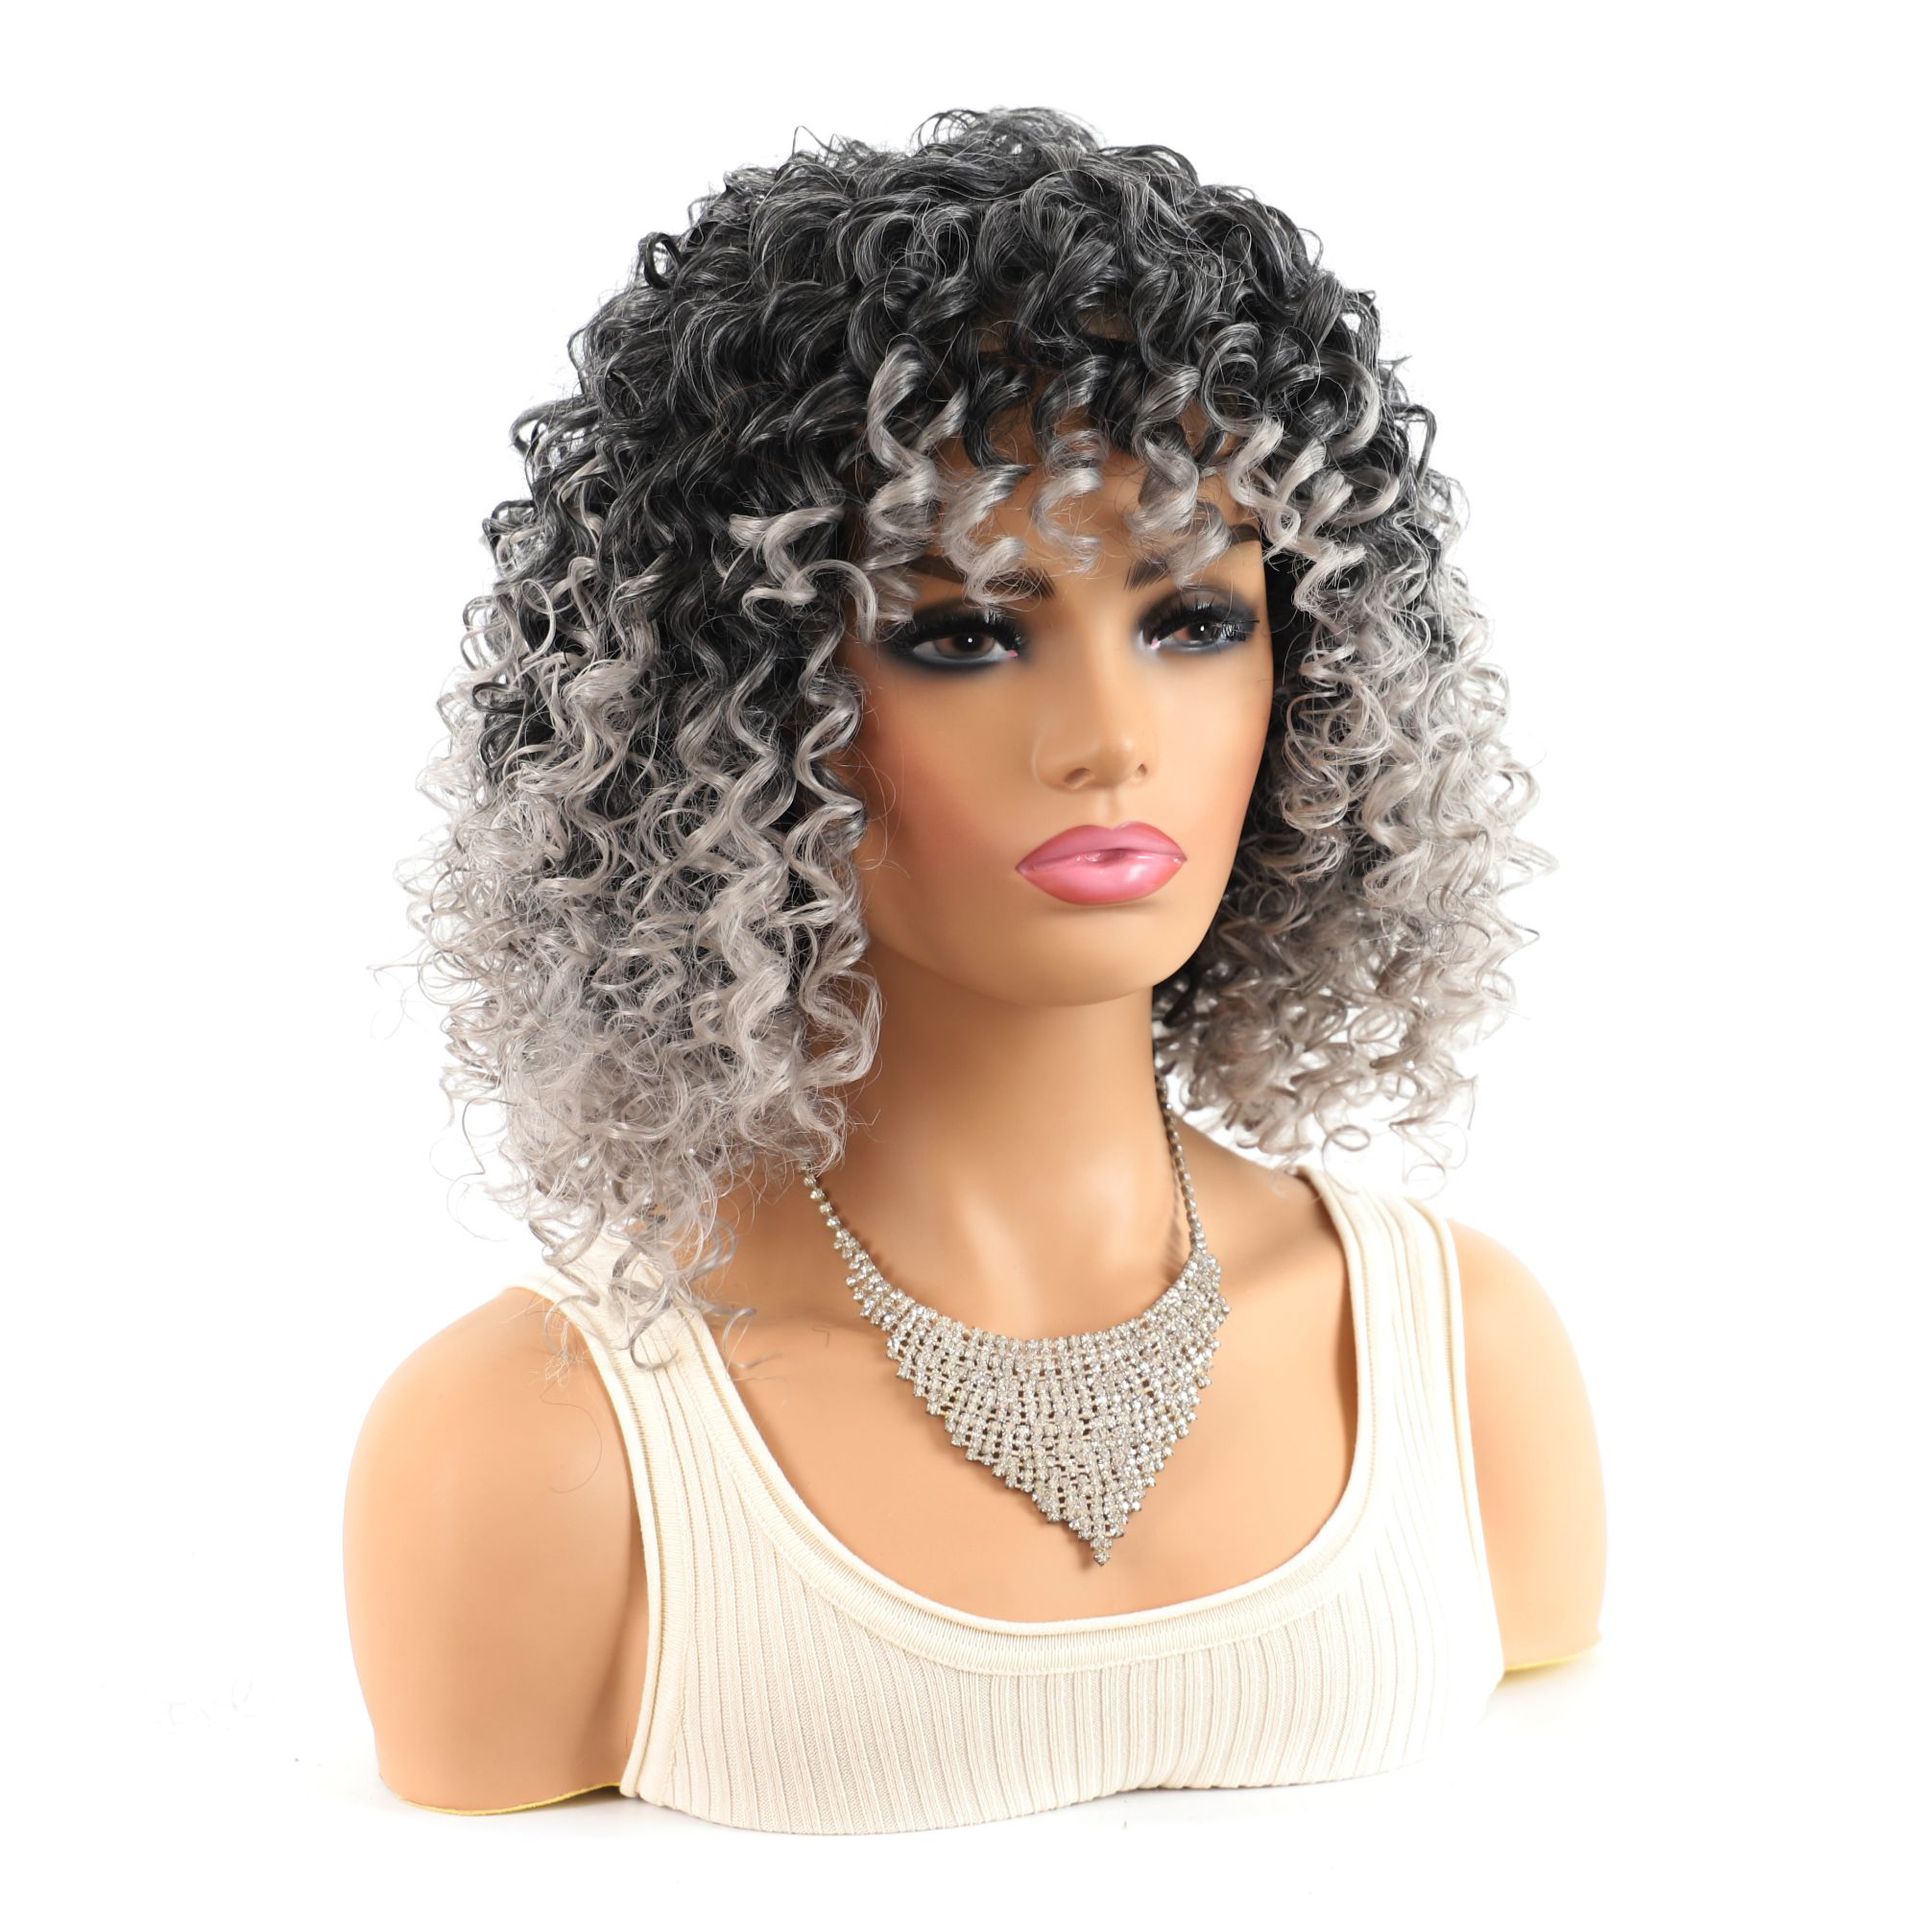 ❤️❤️❤️ Short Hair Wig Afro Kinky Curly Hair Full Wig Ombre Gray Synthetic Hair Deep Curly Full Wig